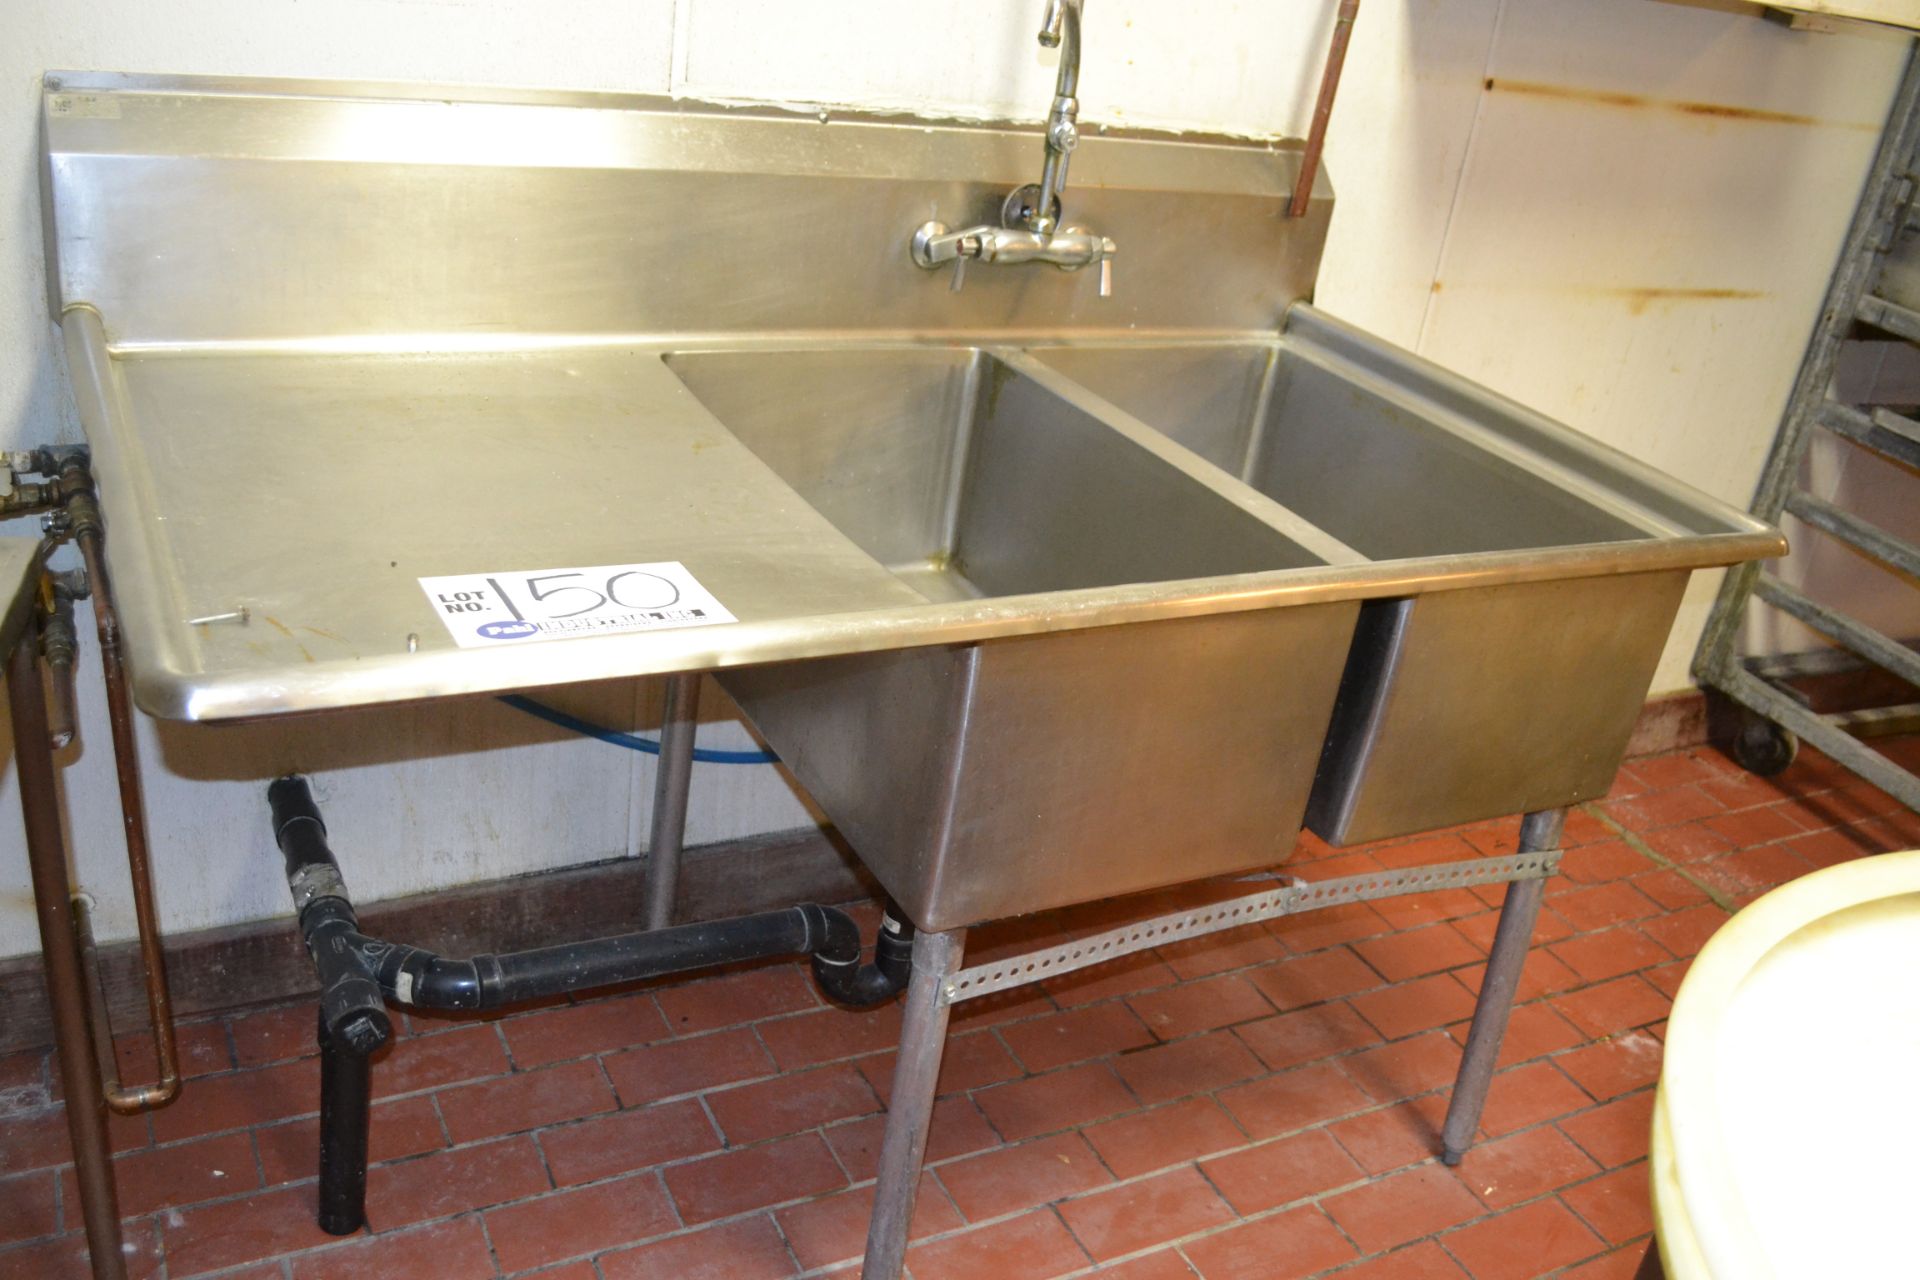 Stainless Steel 2 bay sink with left runoff 5' X 32" X 3' Tall - Image 2 of 2